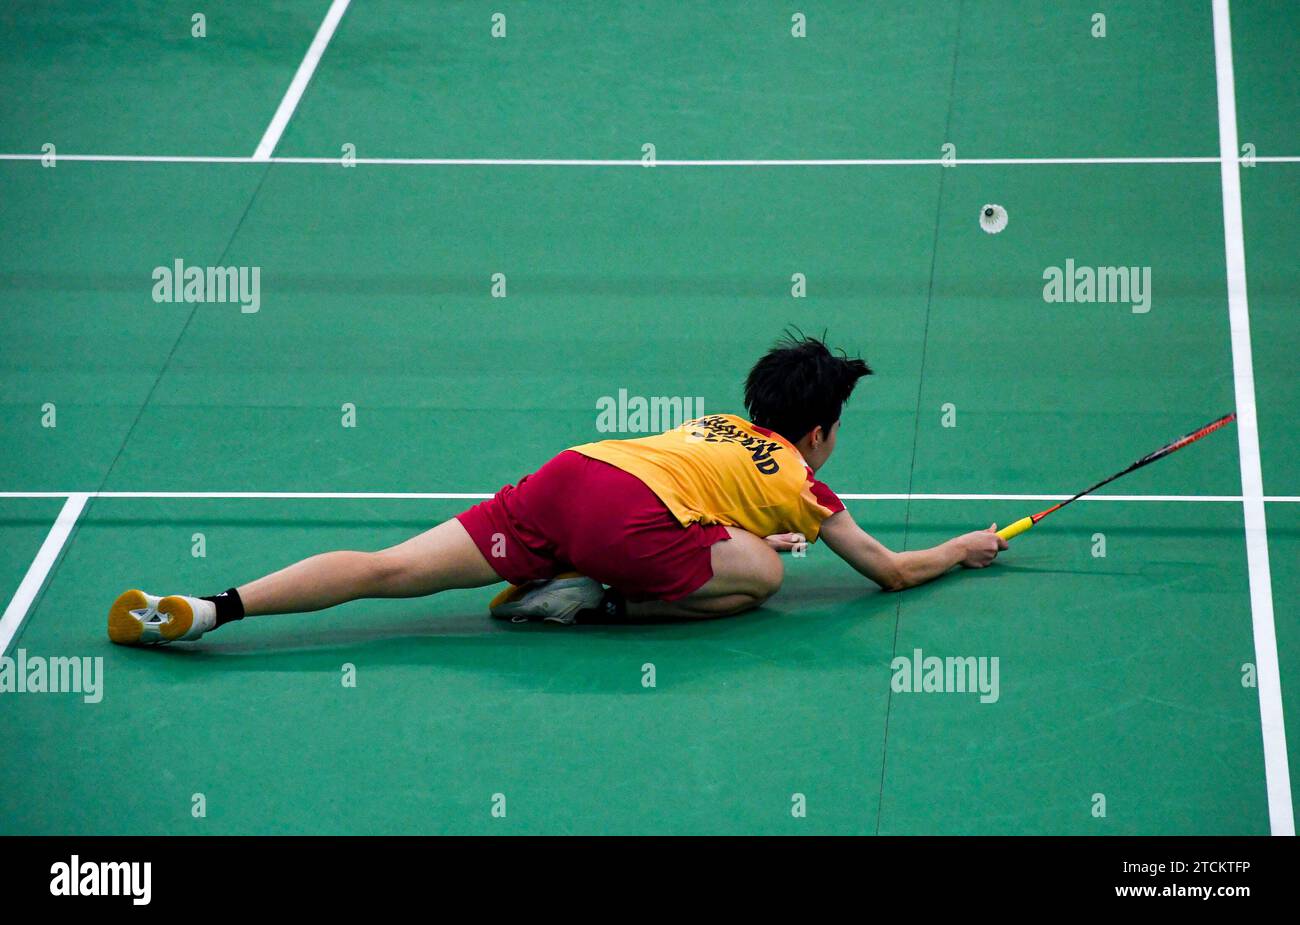 Lalinrat Chaiwan of Thailand competes against Line Christophersen ( not pictured) of Denmark during the finals of Yonex-Sunrise Guwahati Masters 2023 Super 100 women's singles badminton tournament at Sarju Sarai Indoor Sports Complex. Lalinrat Chaiwan won 21-14, 17-21,21-16. Stock Photo